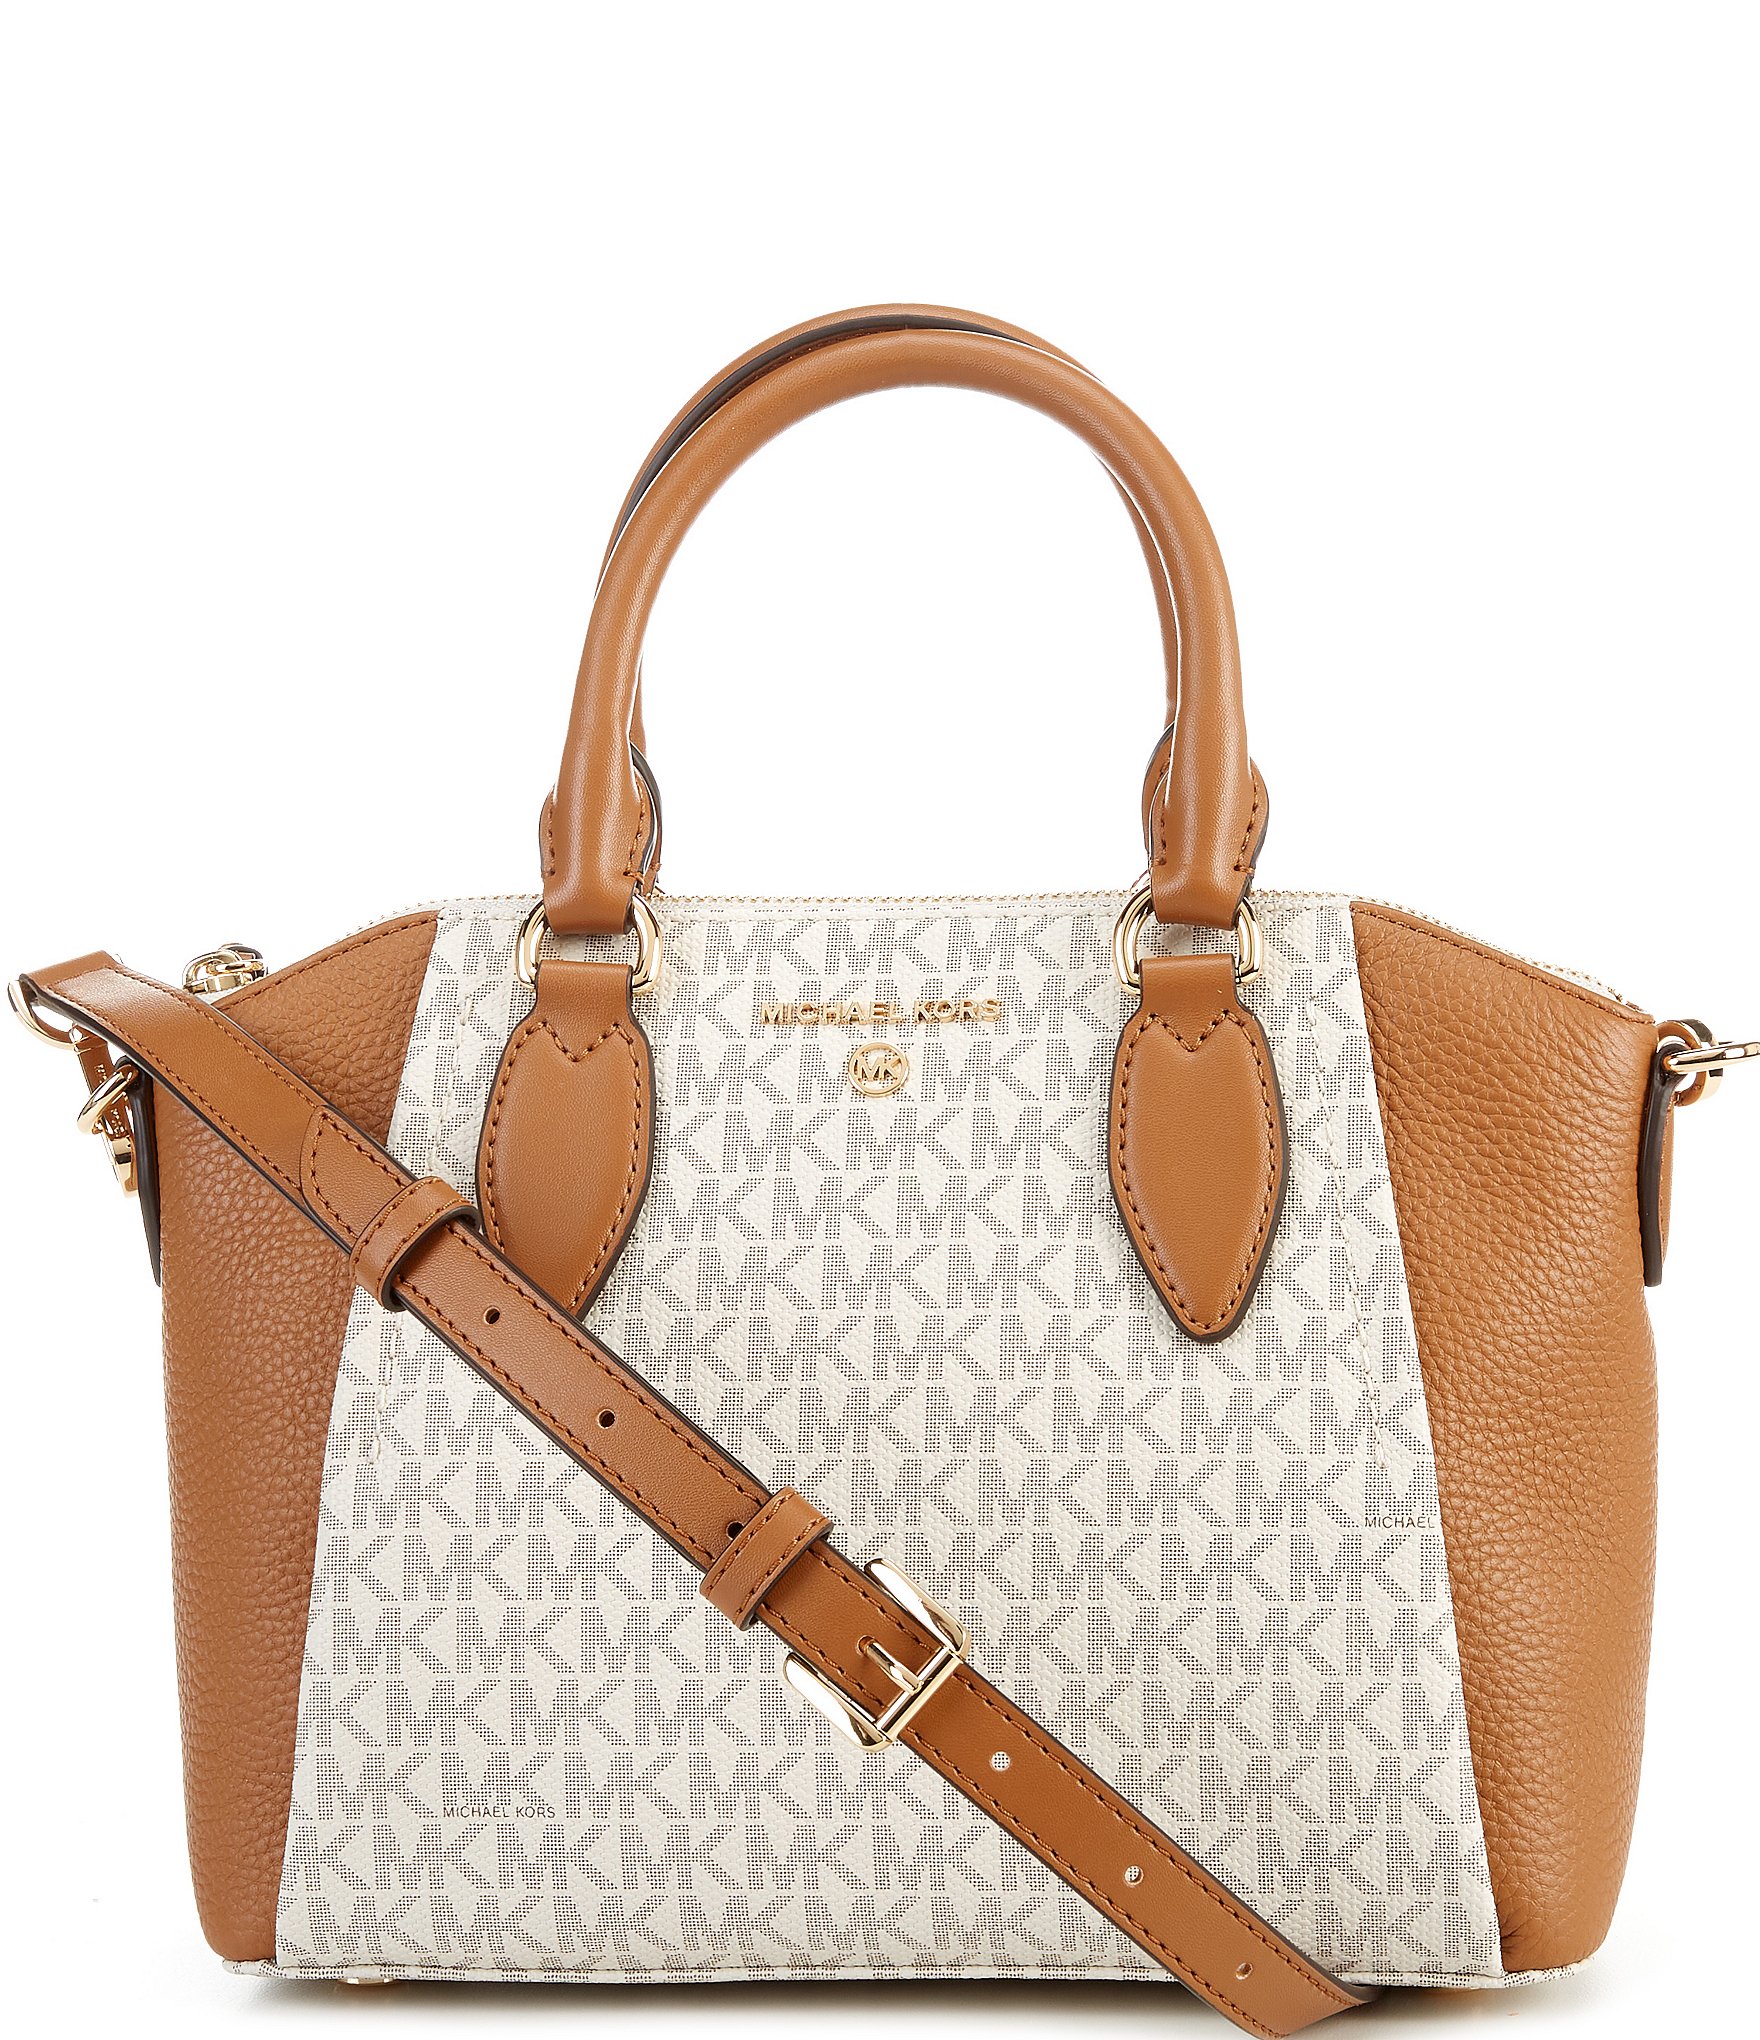 Handbags Leather Michael Kors Tote Blue Brown Bag, For Casual Wear